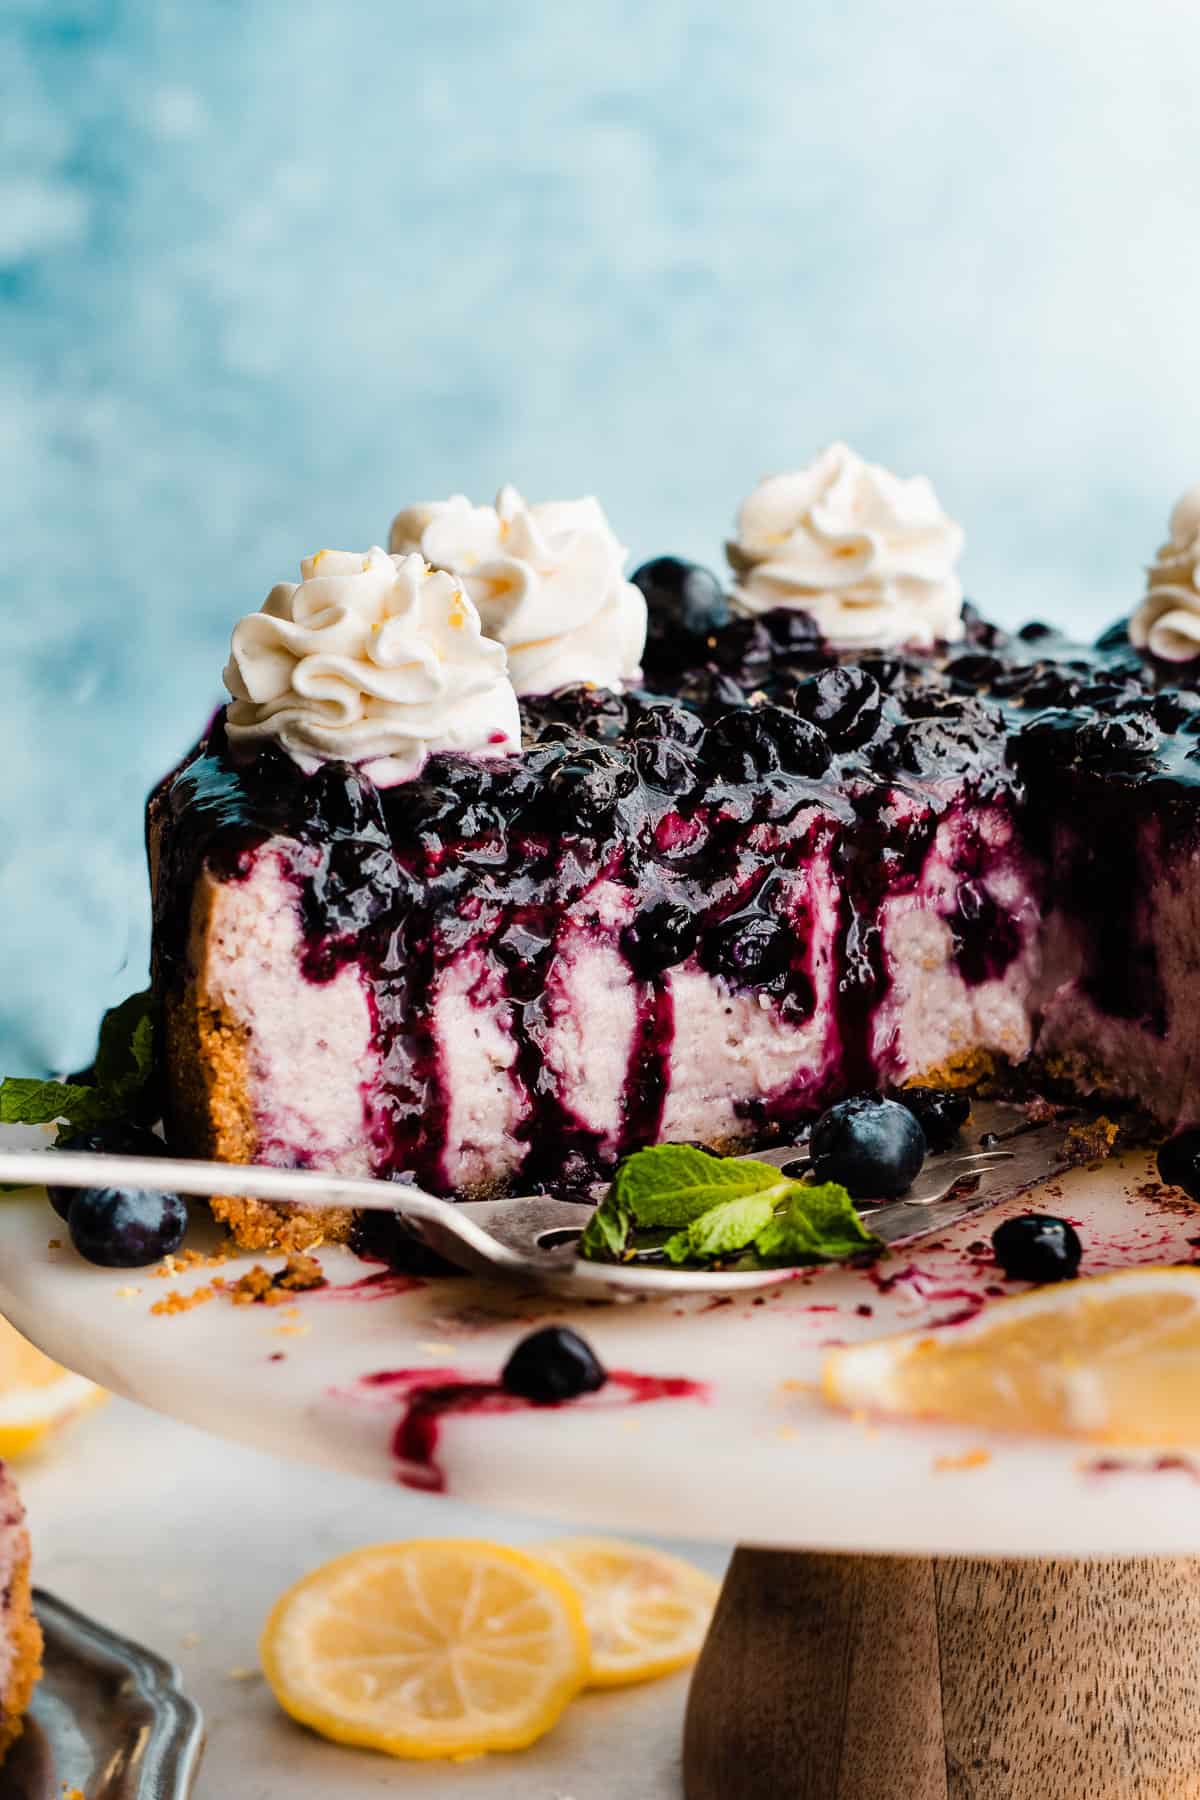 Blueberry cheesecake on a white cake stand with slices of lemons, topped with blueberry sauce, piped whipped cream, and a few fresh mint leaves. A large portion has been removed to show the inside of the dessert.